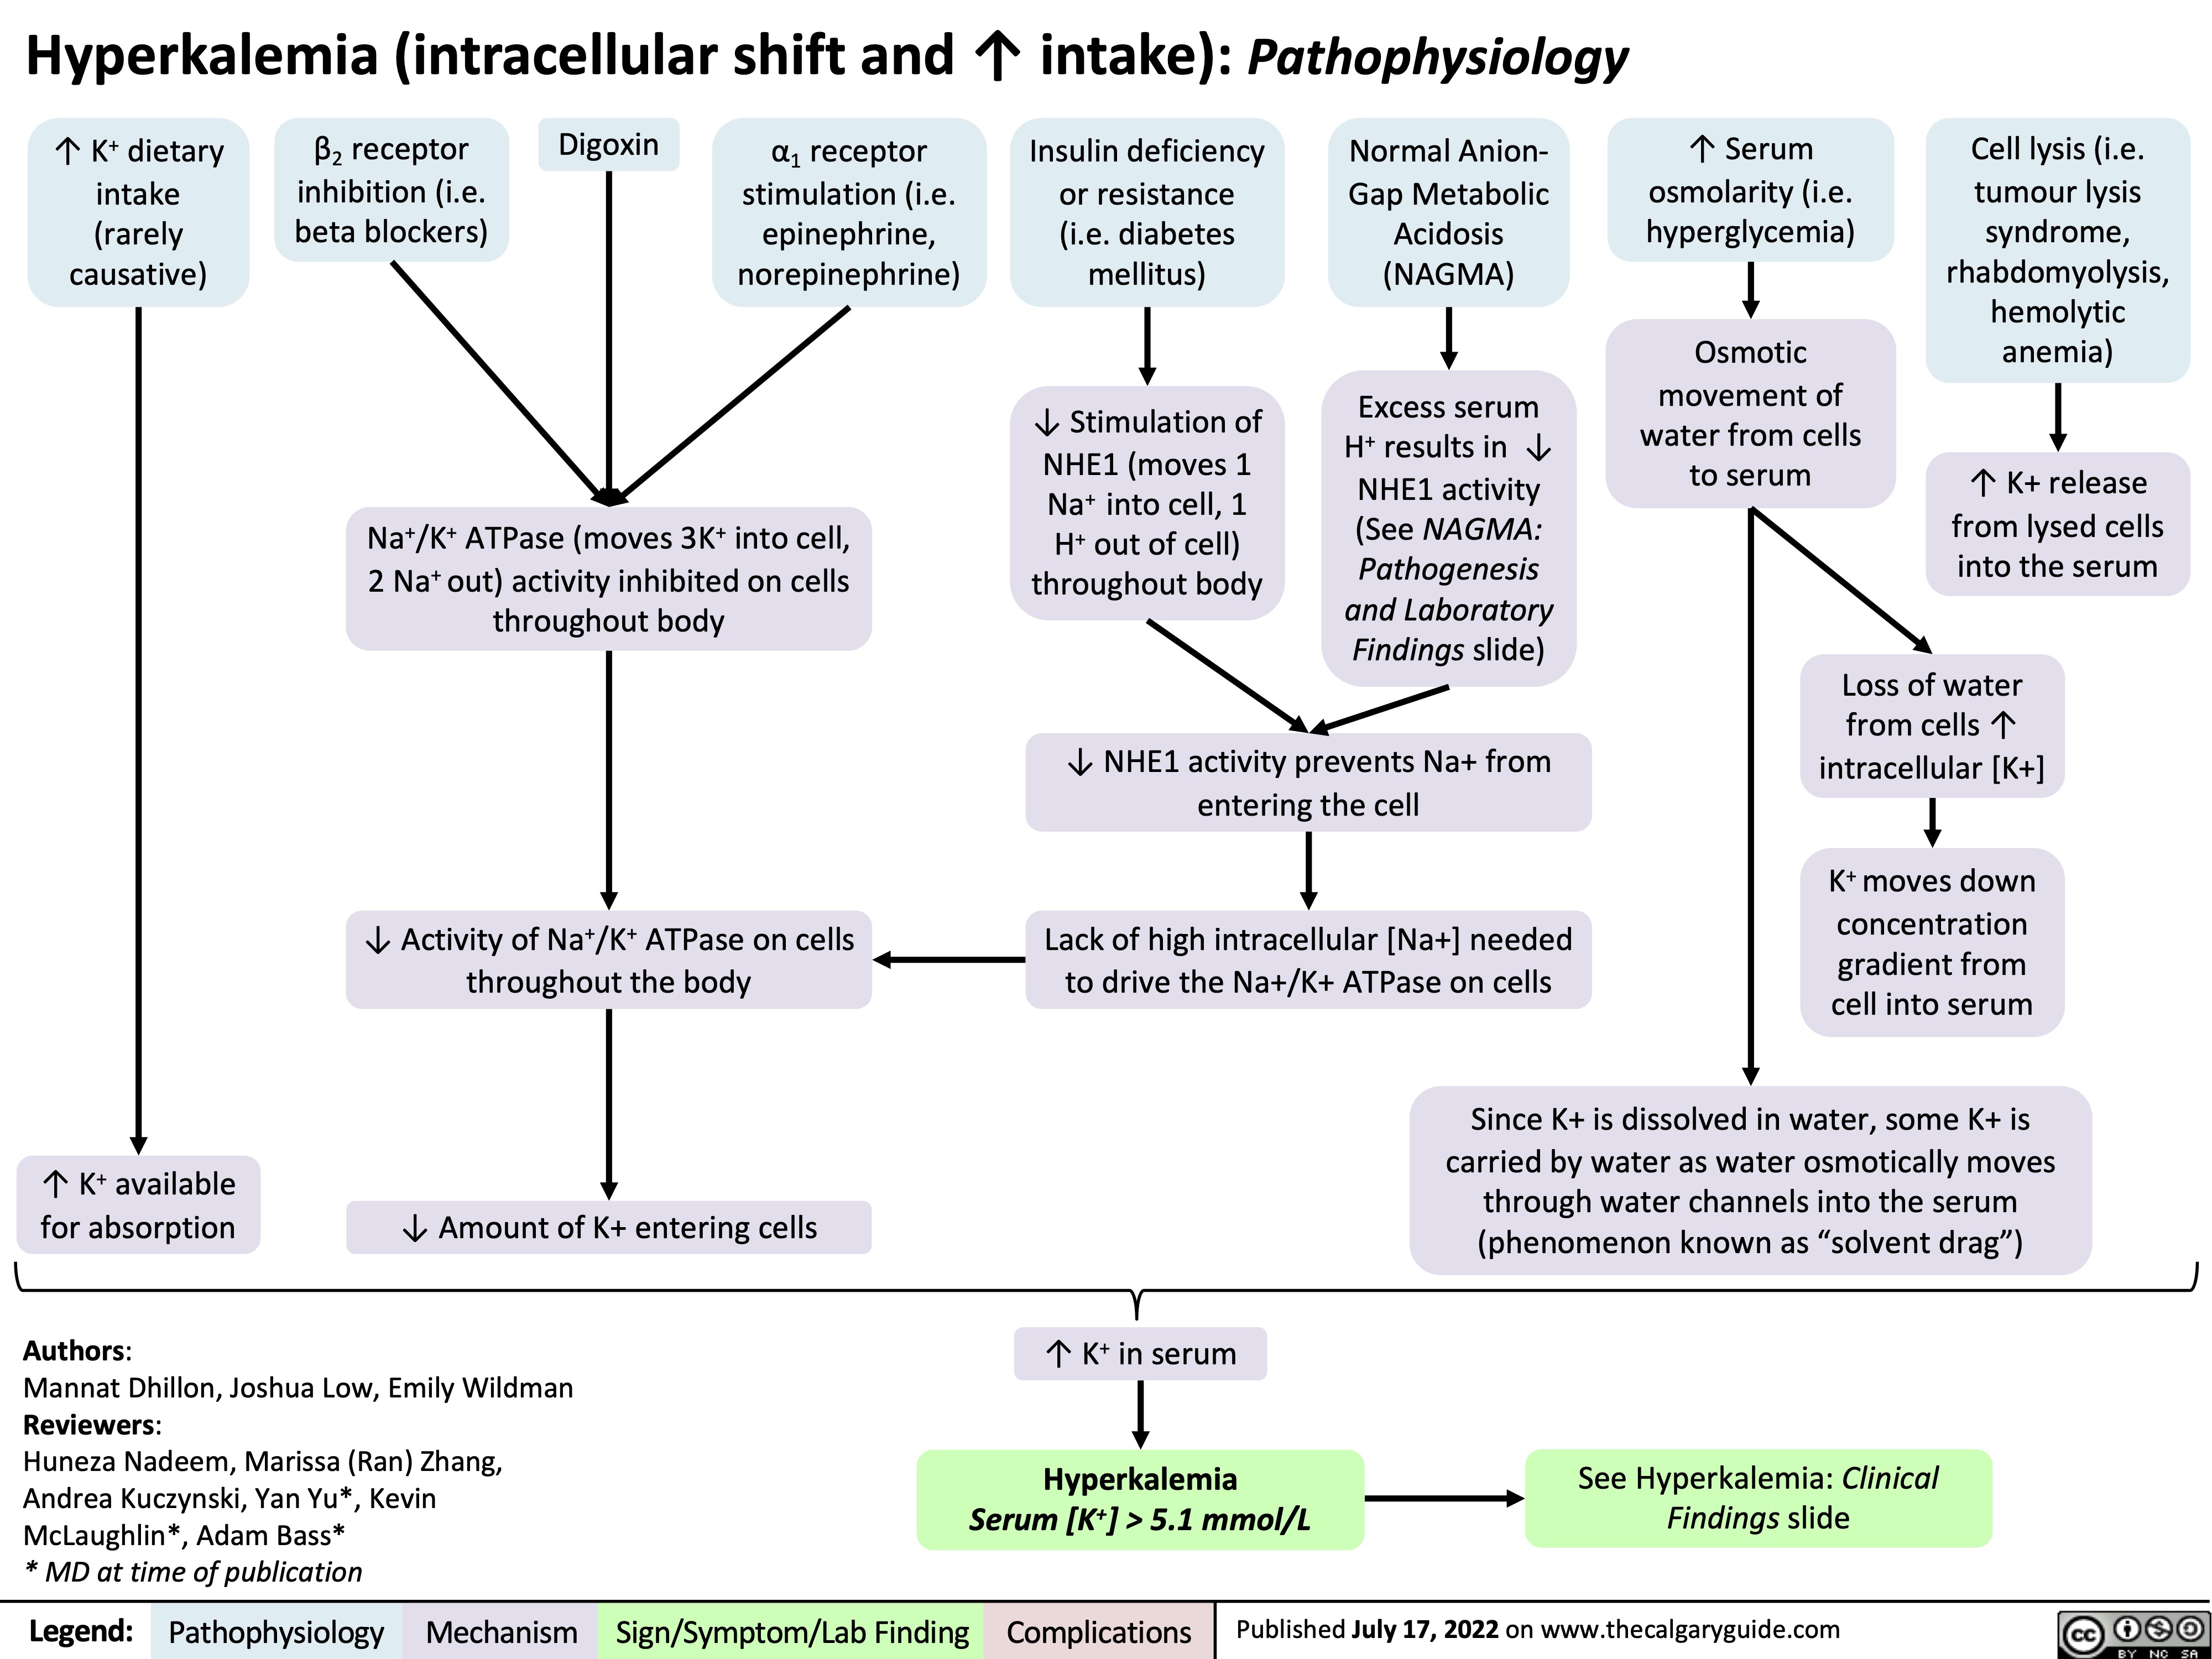 Hyperkalemia (intracellular shift and ↑ intake): Pathophysiology
        ↑ K+ dietary intake (rarely causative)
β2 receptor inhibition (i.e. beta blockers)
Digoxin
α1 receptor stimulation (i.e. epinephrine, norepinephrine)
Insulin deficiency or resistance (i.e. diabetes mellitus)
↓ Stimulation of NHE1 (moves 1 Na+ into cell, 1 H+ out of cell) throughout body
Normal Anion- Gap Metabolic Acidosis (NAGMA)
Excess serum H+ results in ↓ NHE1 activity (See NAGMA: Pathogenesis and Laboratory Findings slide)
↑ Serum osmolarity (i.e. hyperglycemia)
Osmotic movement of water from cells to serum
Cell lysis (i.e. tumour lysis syndrome, rhabdomyolysis, hemolytic anemia)
↑ K+ release from lysed cells into the serum
         Na+/K+ ATPase (moves 3K+ into cell, 2 Na+ out) activity inhibited on cells throughout body
        ↓ Activity of Na+/K+ ATPase on cells throughout the body
↓ Amount of K+ entering cells
↓ NHE1 activity prevents Na+ from entering the cell
Lack of high intracellular [Na+] needed to drive the Na+/K+ ATPase on cells
Loss of water from cells ↑ intracellular [K+]
K+ moves down concentration gradient from cell into serum
    ↑ K+ available for absorption
Since K+ is dissolved in water, some K+ is carried by water as water osmotically moves through water channels into the serum (phenomenon known as “solvent drag”)
See Hyperkalemia: Clinical Findings slide
   Authors:
Mannat Dhillon, Joshua Low, Emily Wildman Reviewers:
Huneza Nadeem, Marissa (Ran) Zhang, Andrea Kuczynski, Yan Yu*, Kevin McLaughlin*, Adam Bass*
* MD at time of publication
↑ K+ in serum
Hyperkalemia
Serum [K+] > 5.1 mmol/L
    Legend:
 Pathophysiology
Mechanism
Sign/Symptom/Lab Finding
 Complications
 Published July 17, 2022 on www.thecalgaryguide.com
   